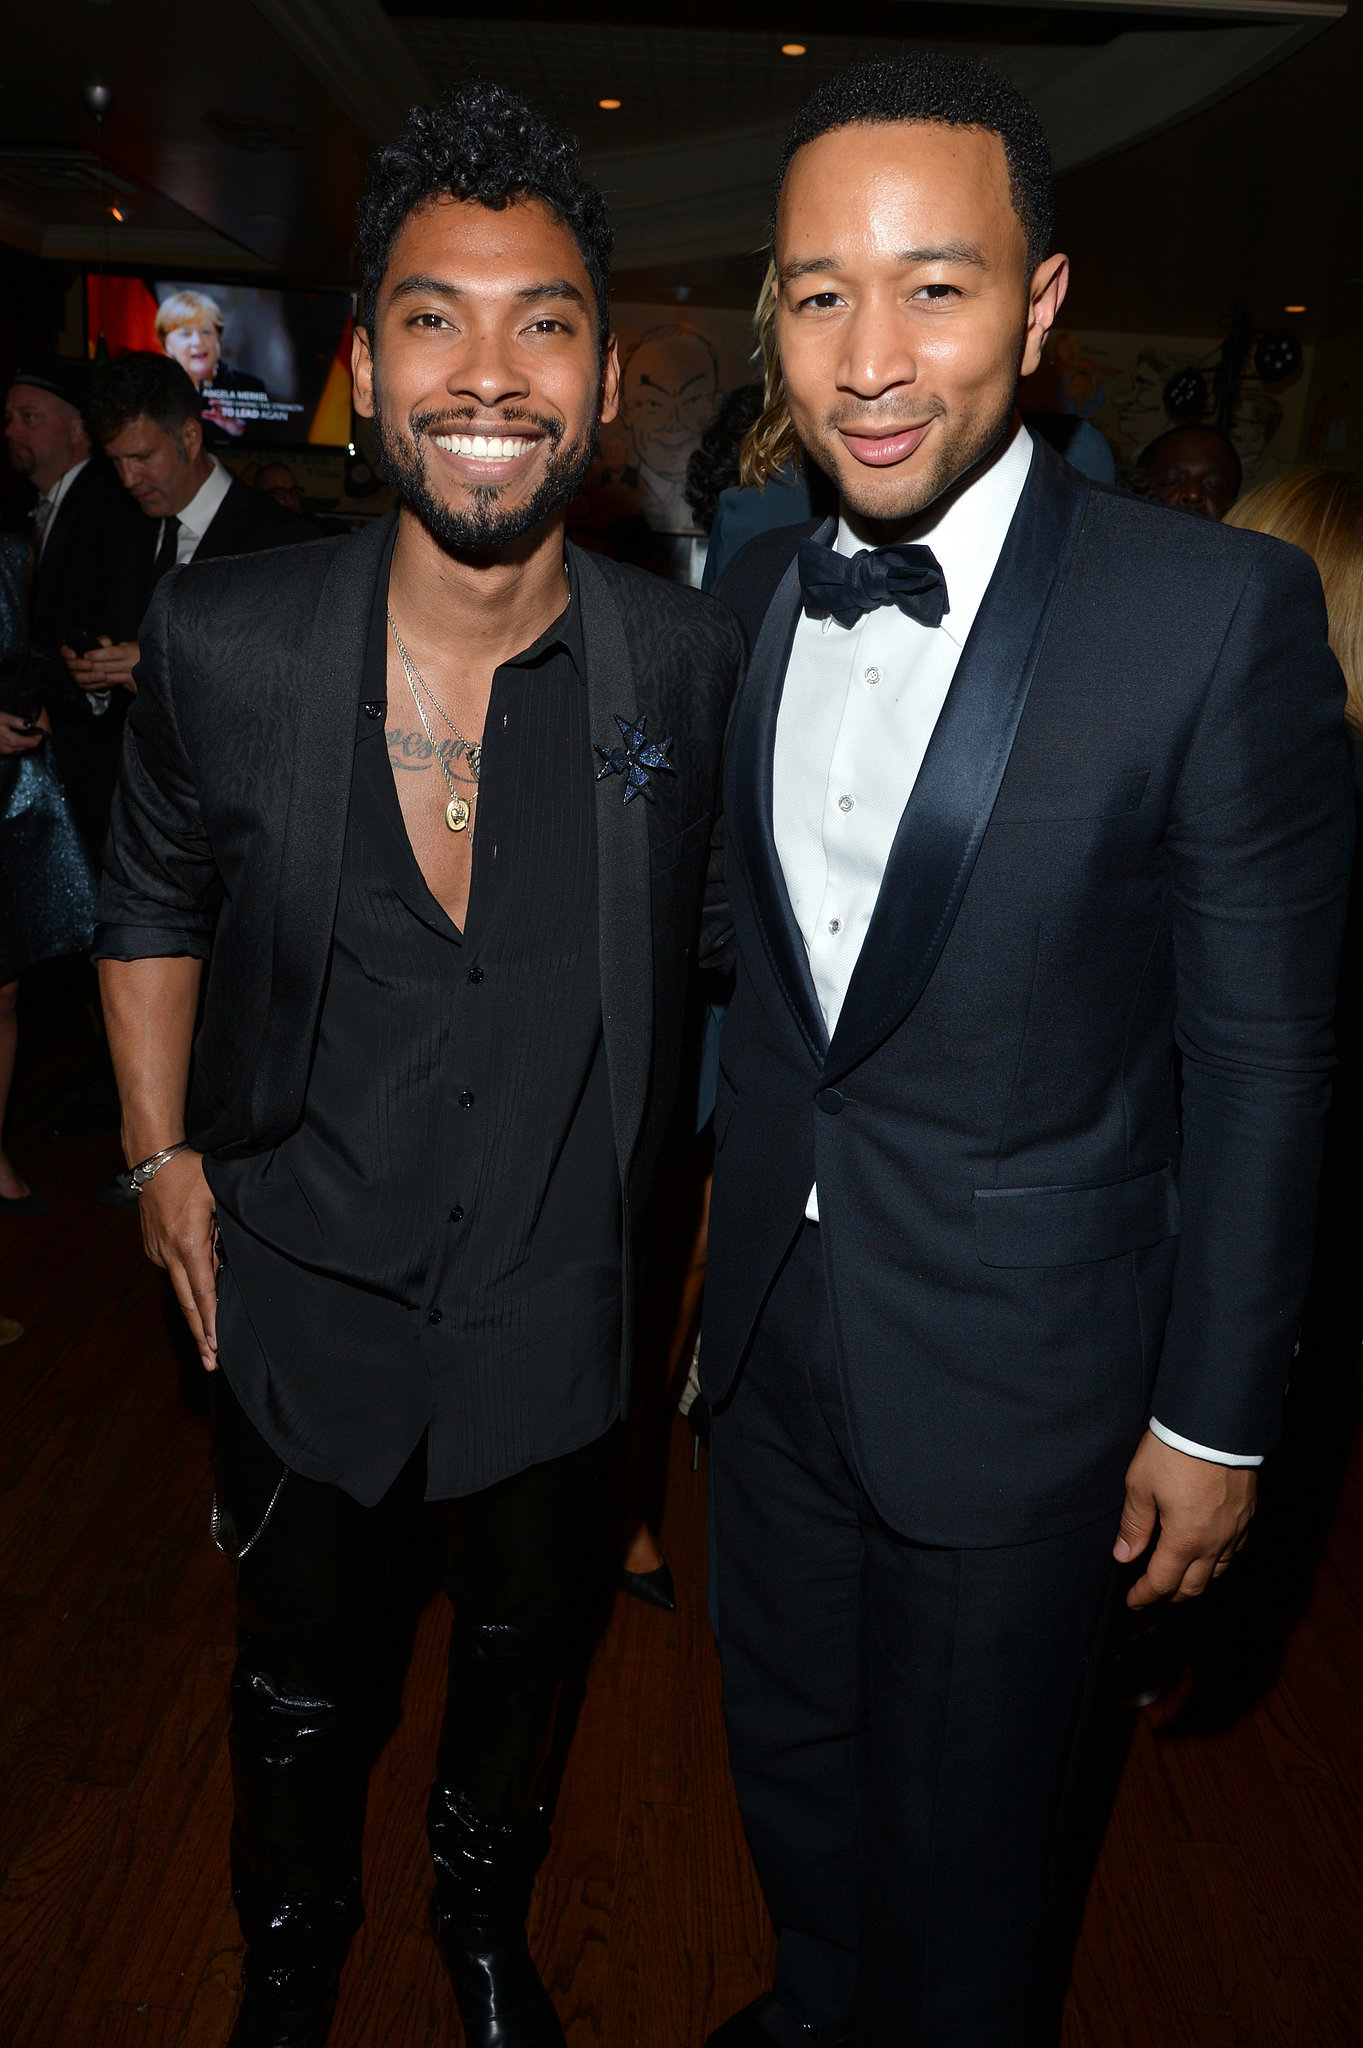 Miguel John Legend mingled Sony Music afterparty